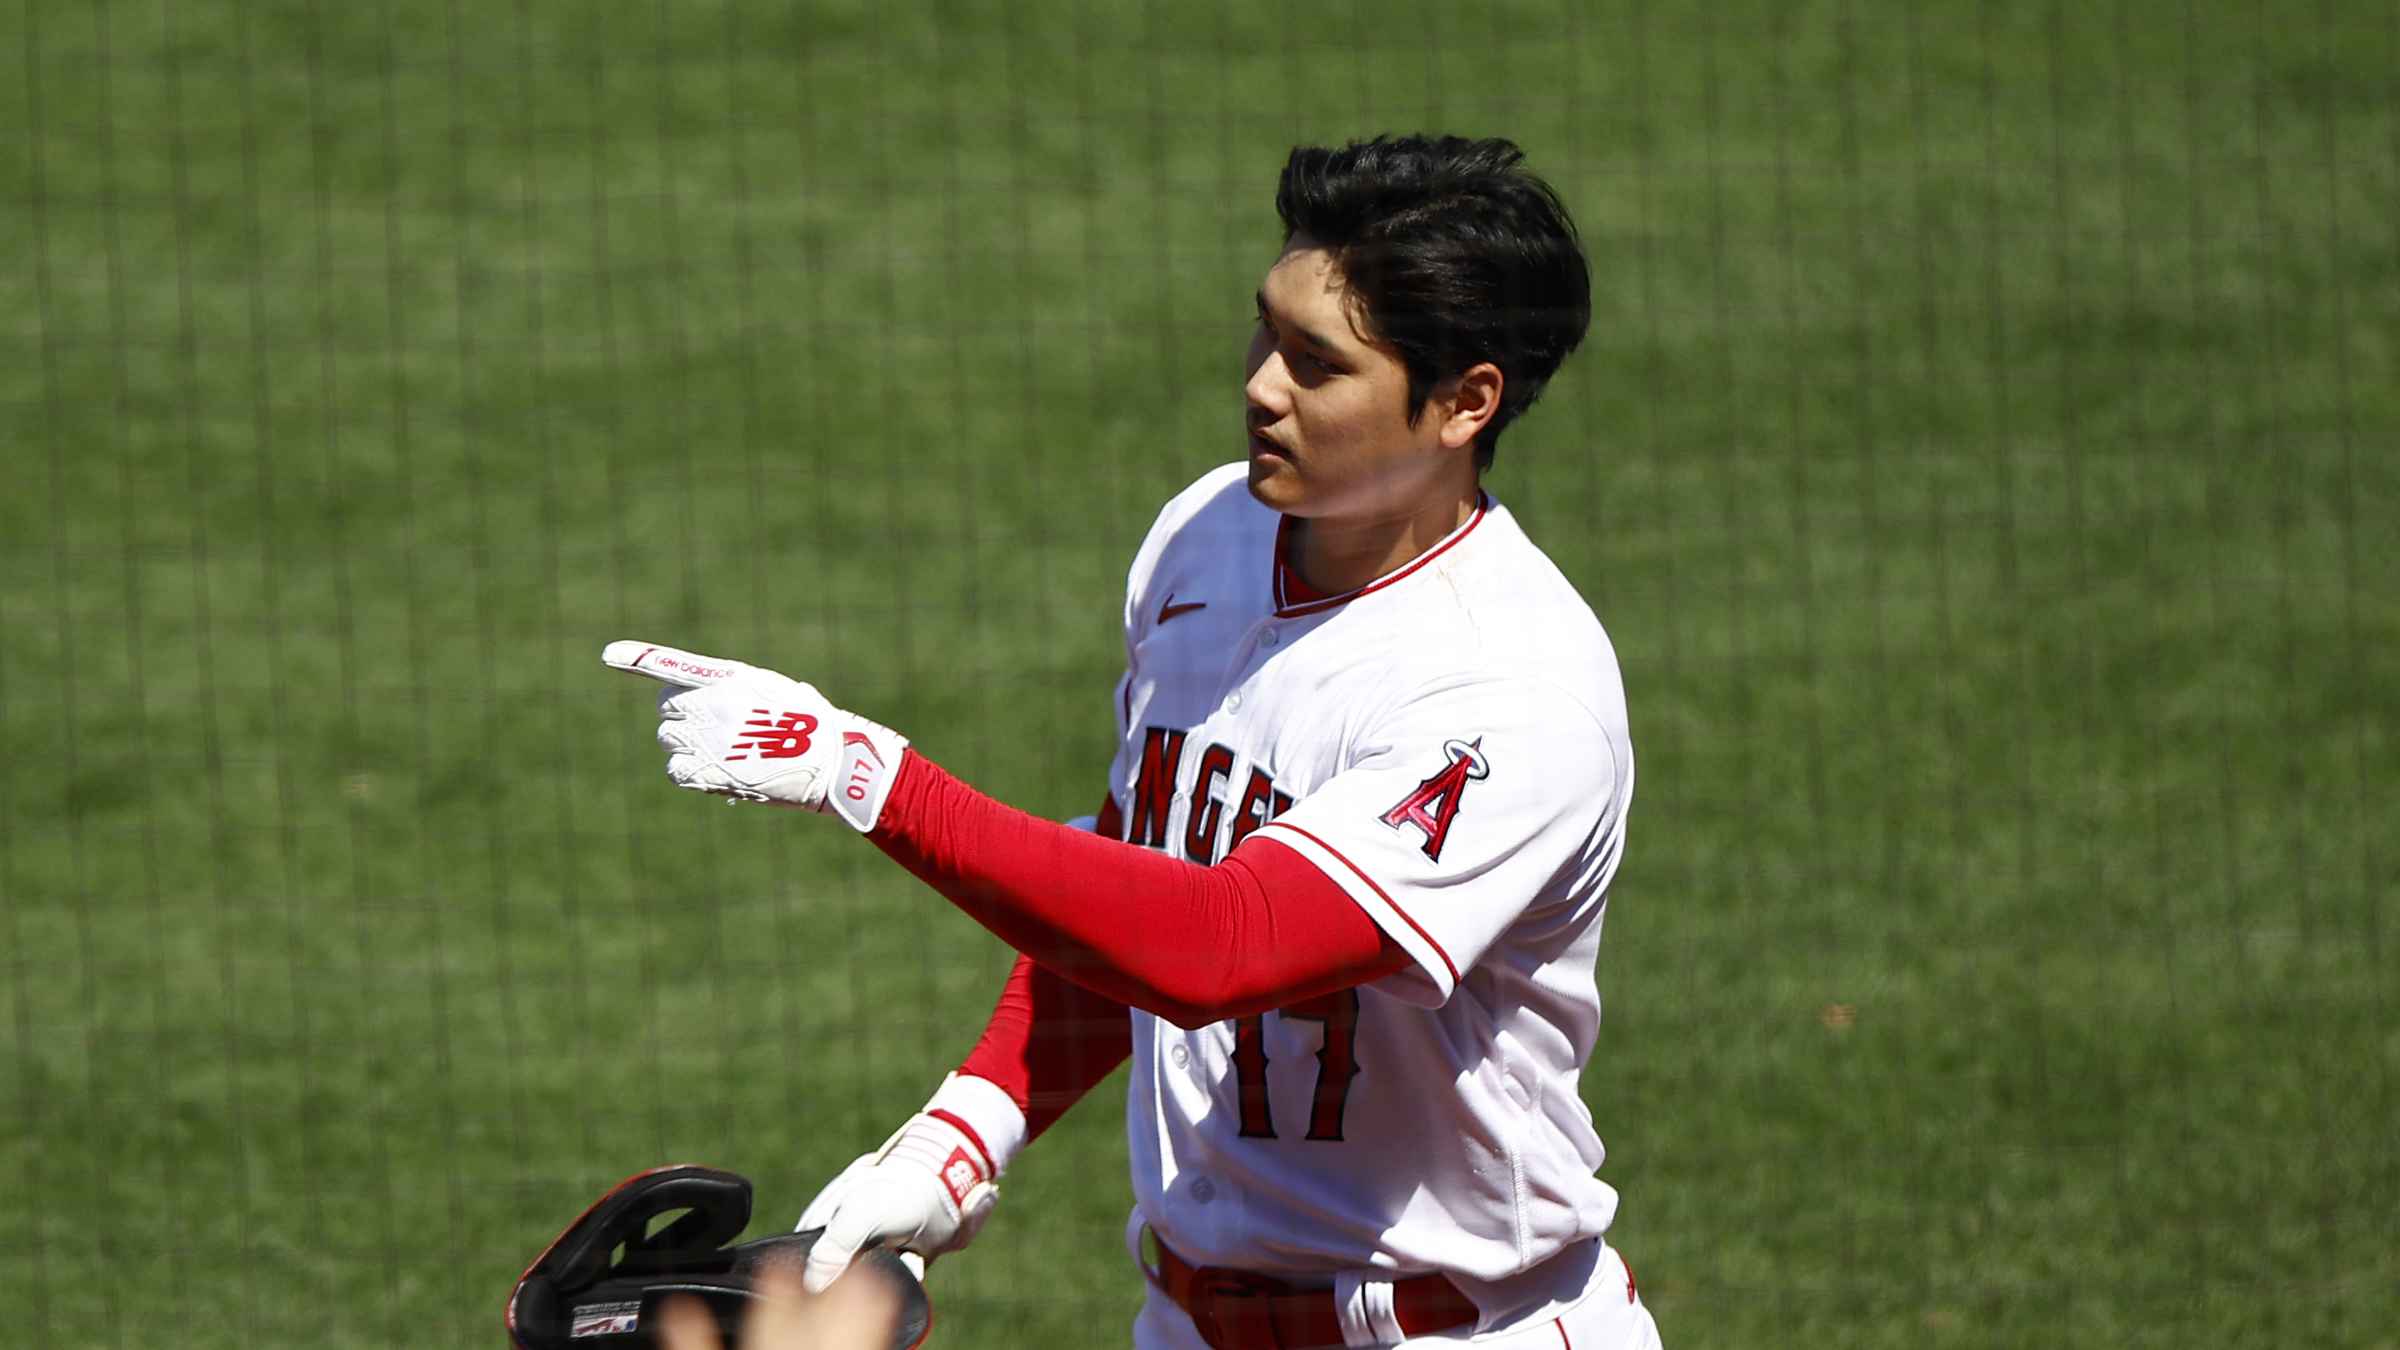 MLB: Los Angeles Angels two-way superstar Shohei Ohtani was